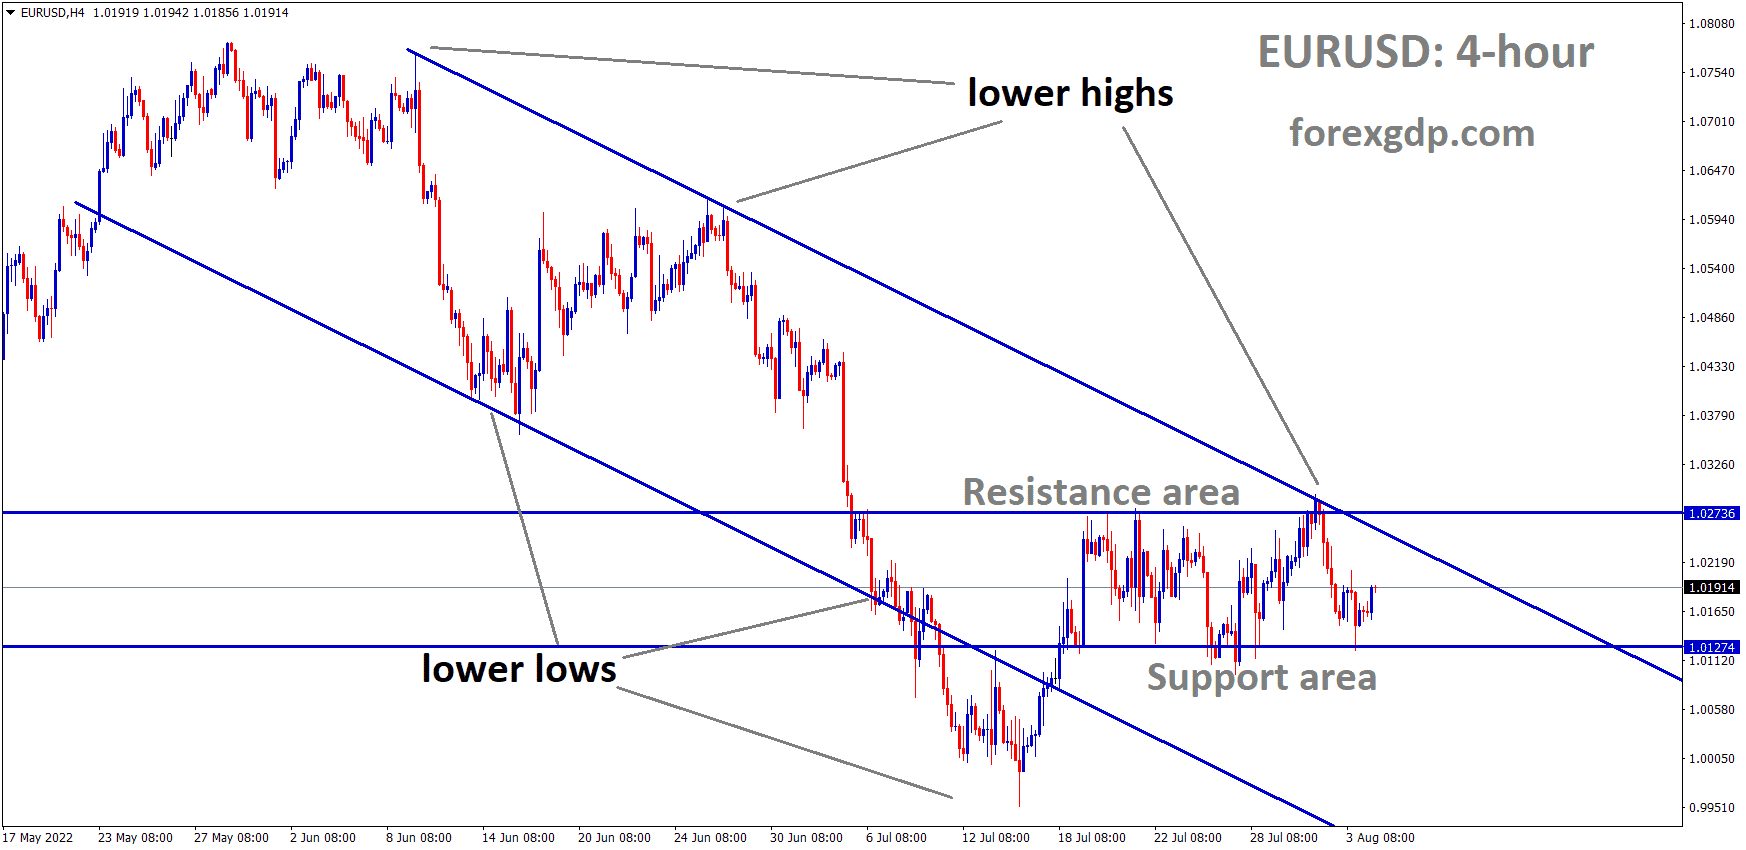 EURUSD is moving in the Descending channel and the Market has rebounded from the Horizontal support area of the minor box pattern.